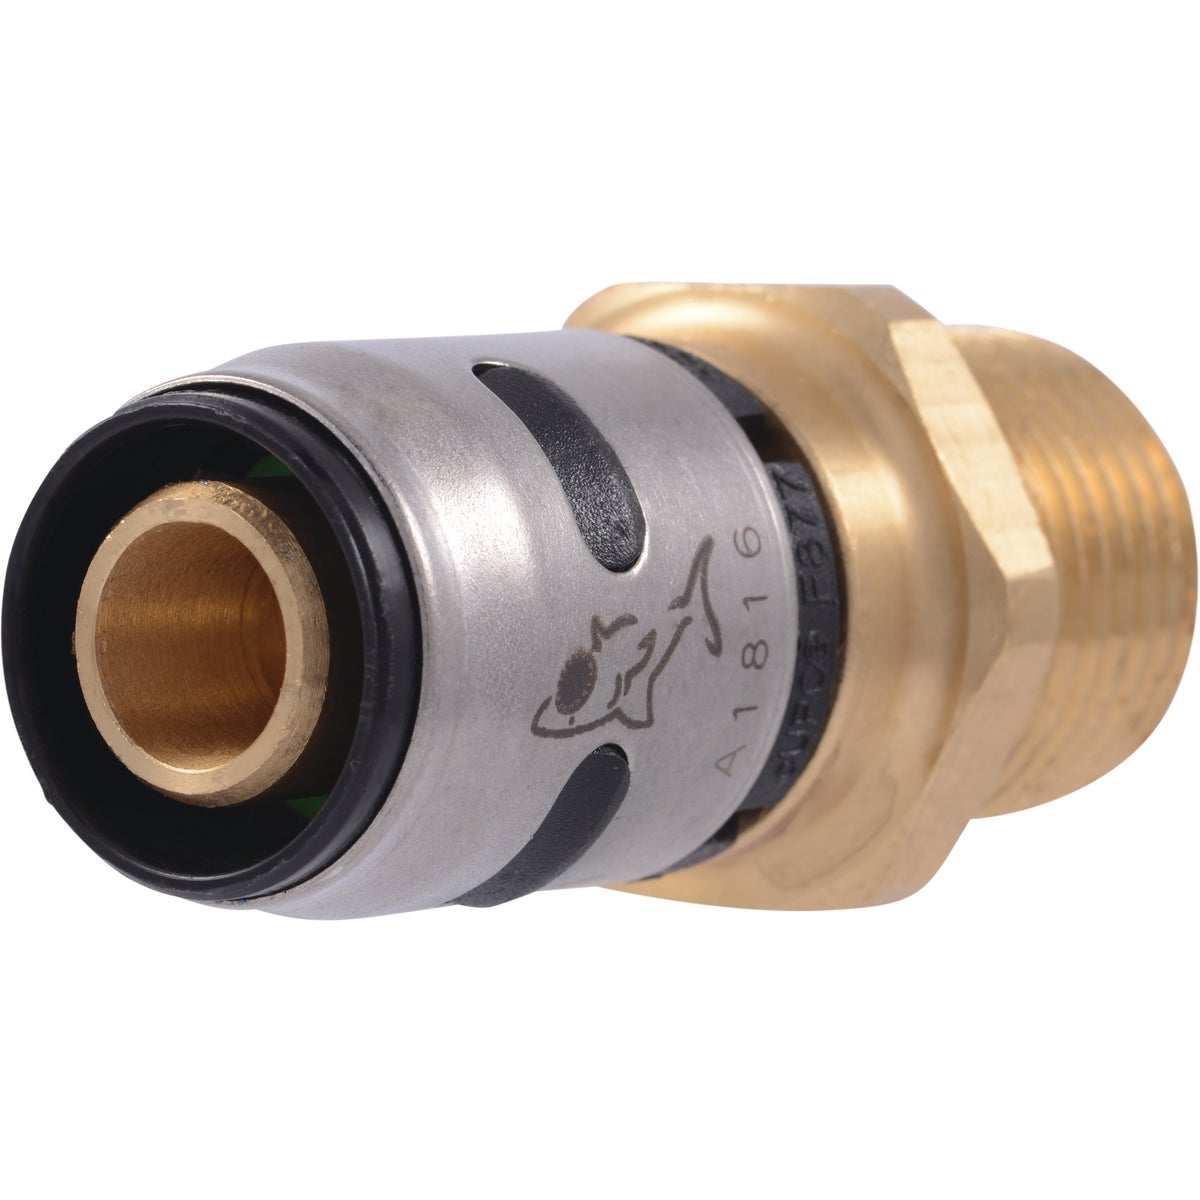 SharkBite EvoPex 1/2 In. x 1/2 In. MPT Push-to-Connect Plastic Connector